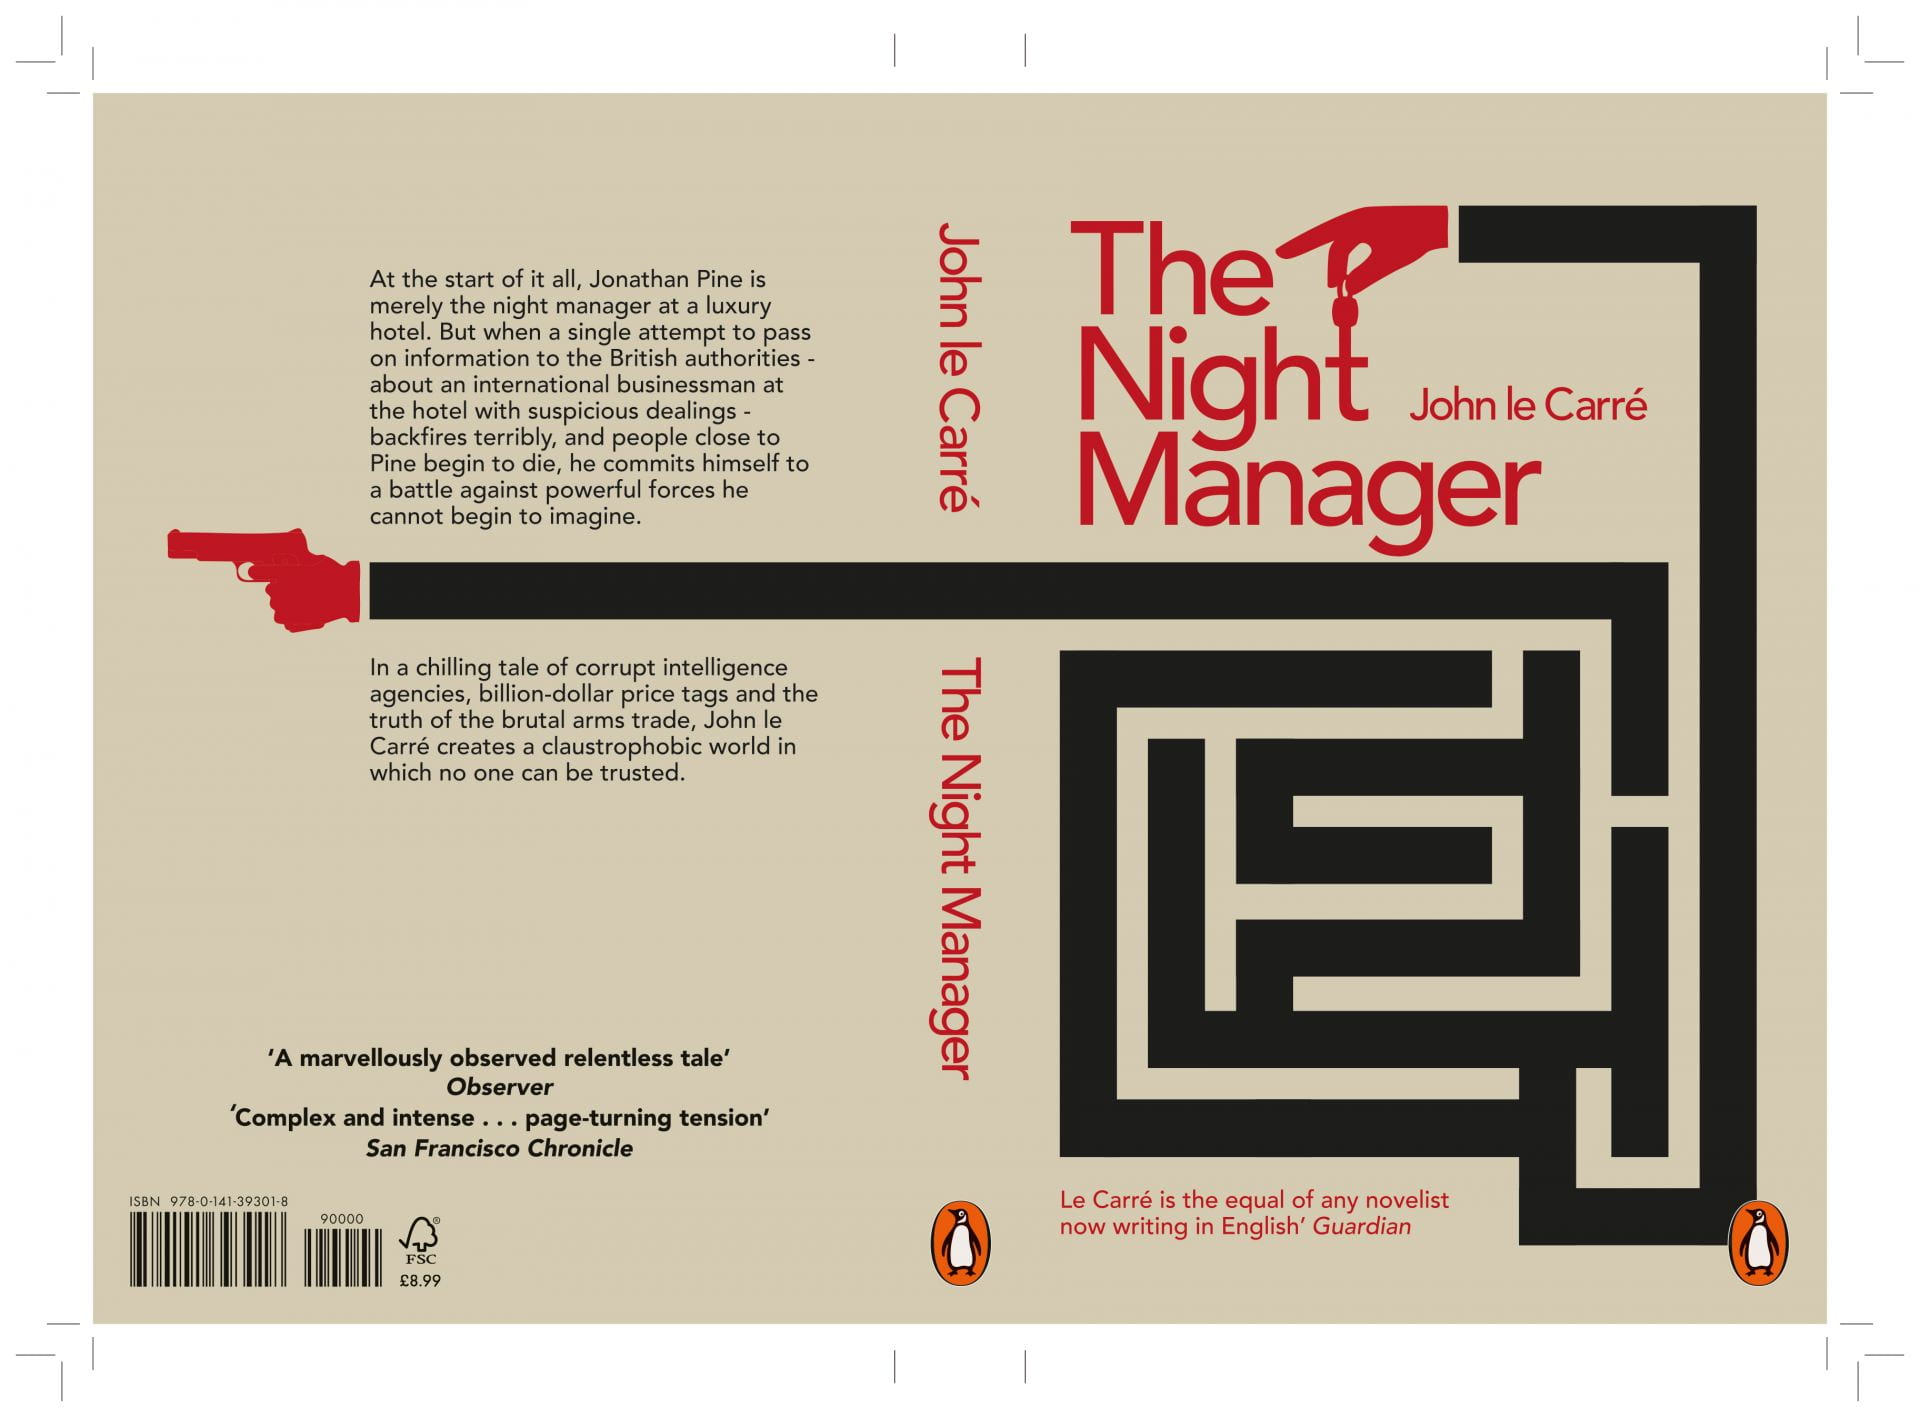 Book cover of 'The night Manager' depicting puzzles and one hand with keys the other holding a gun.